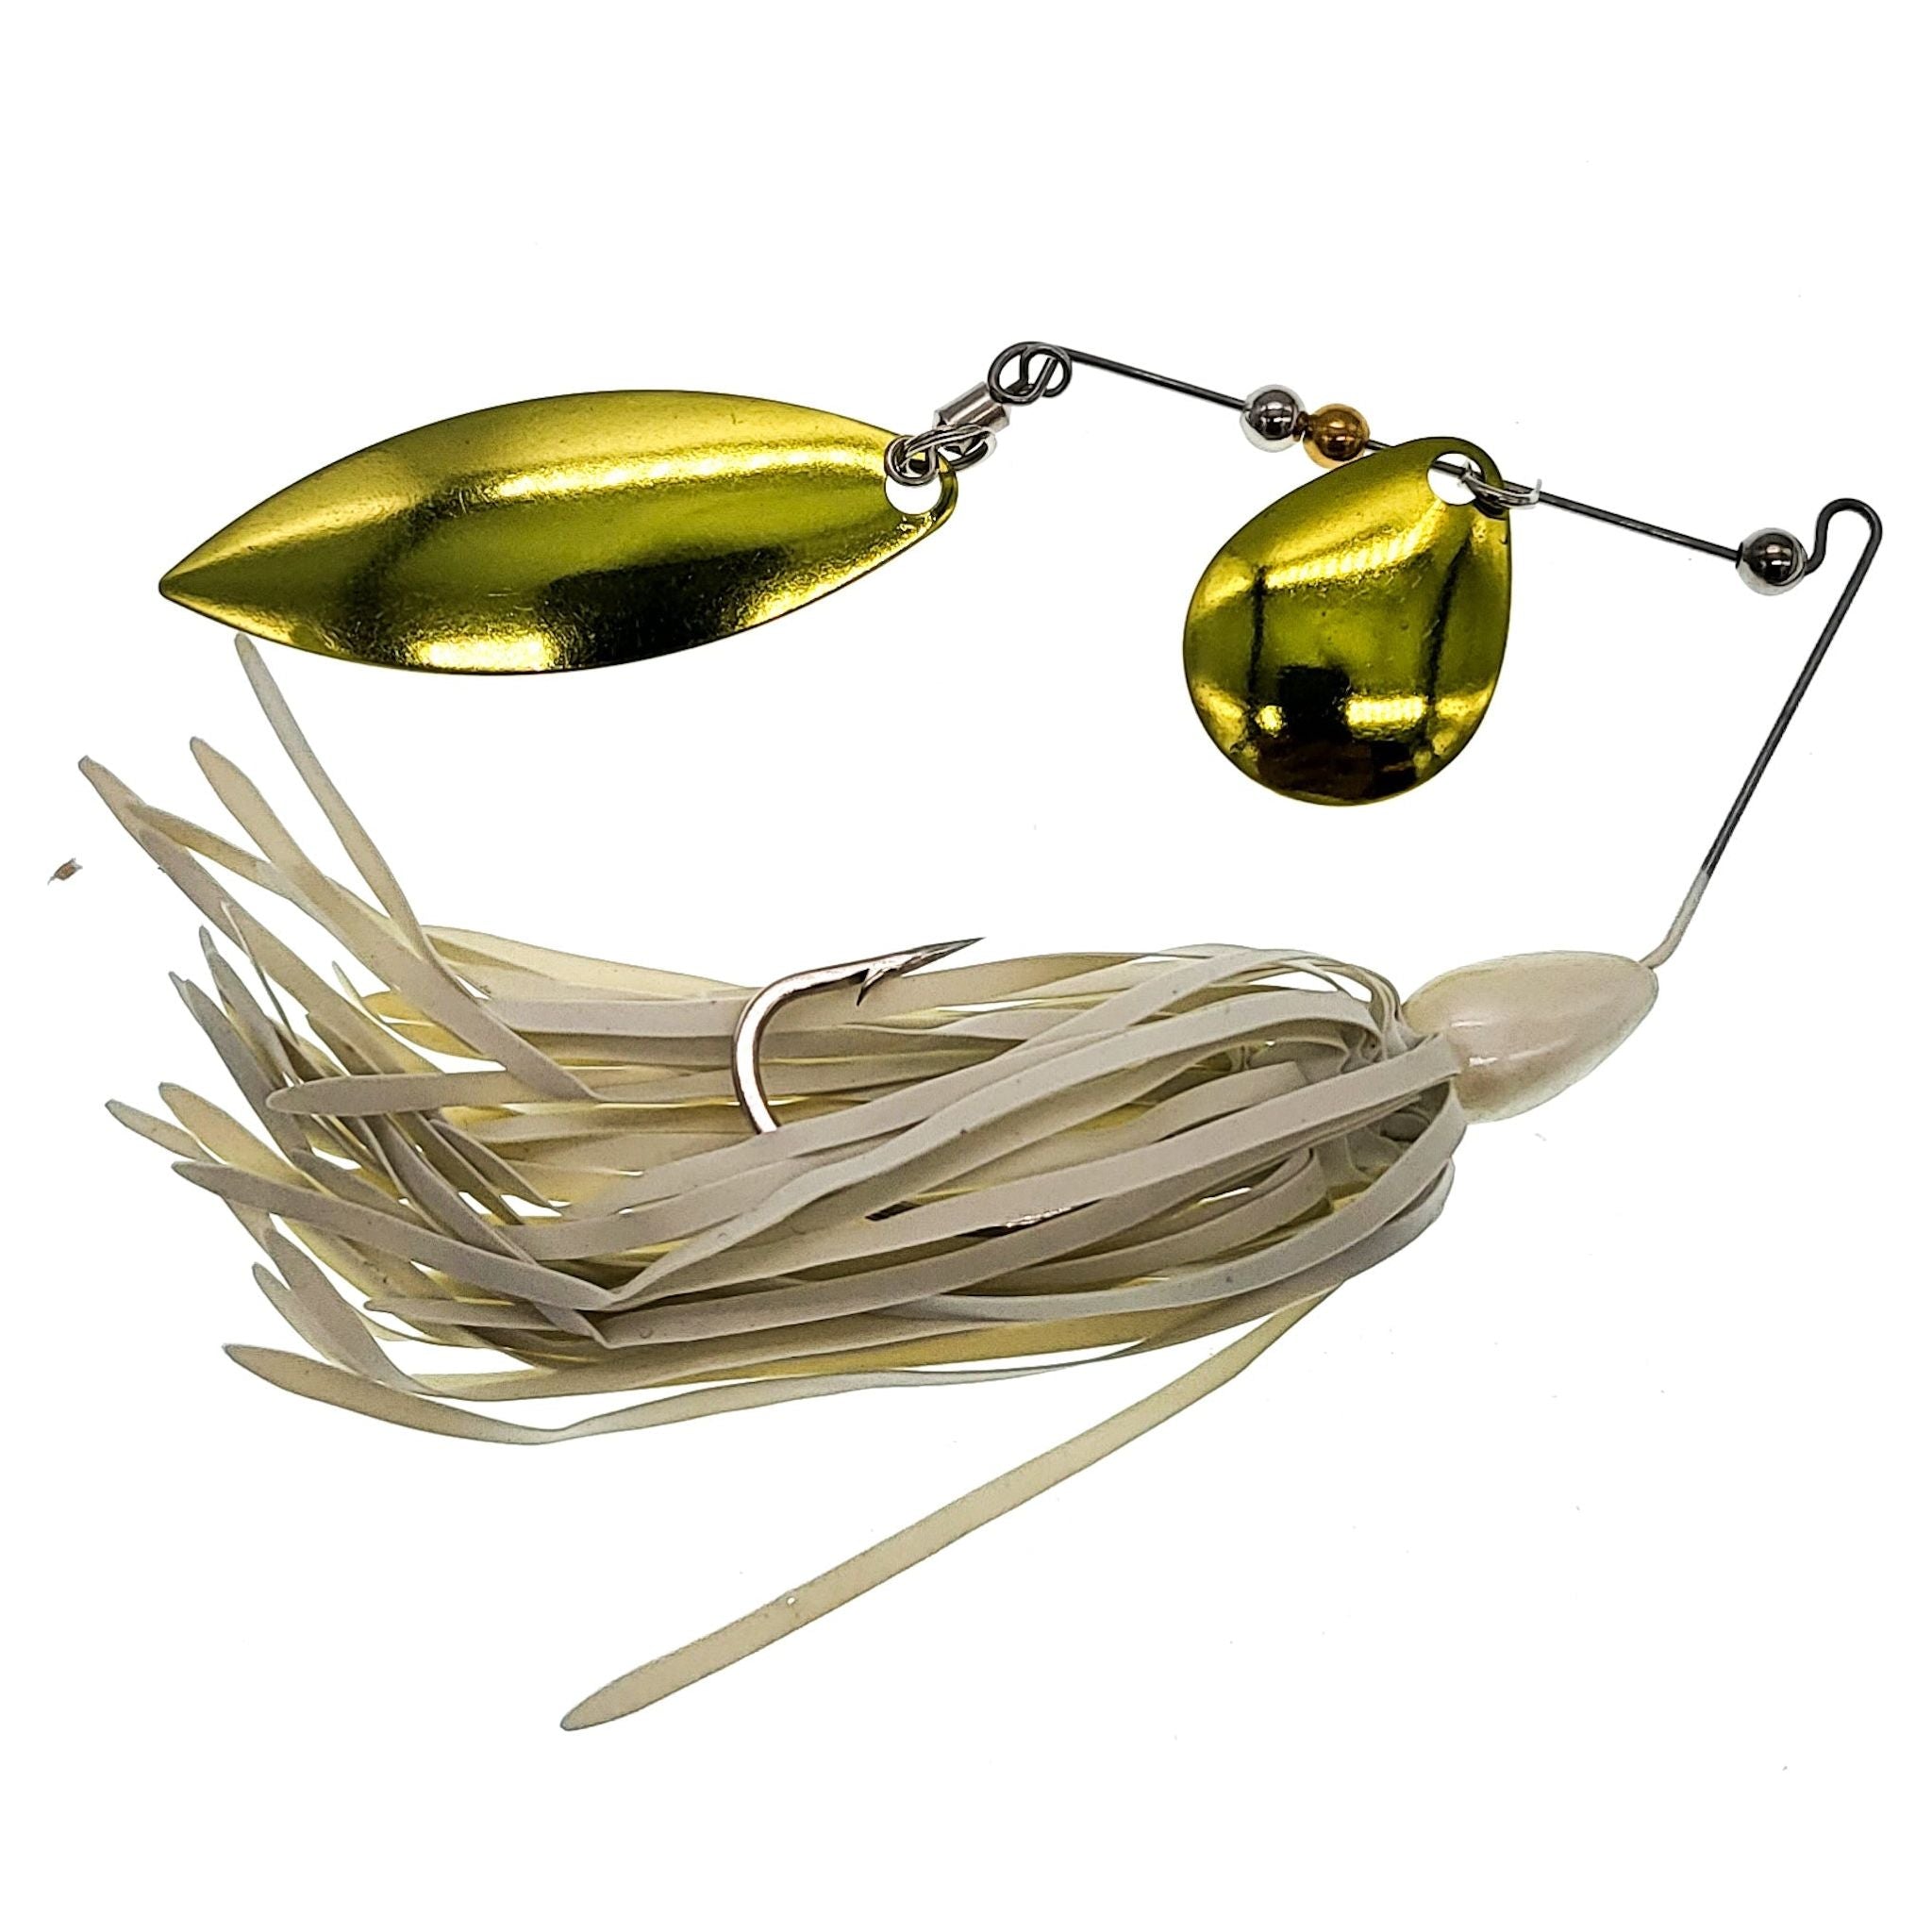 https://cdn.shopify.com/s/files/1/0542/5597/6629/products/humdinger-spinnerbait-coloradowillow-blade-14-oz-qty-1-377174.jpg?v=1704835605